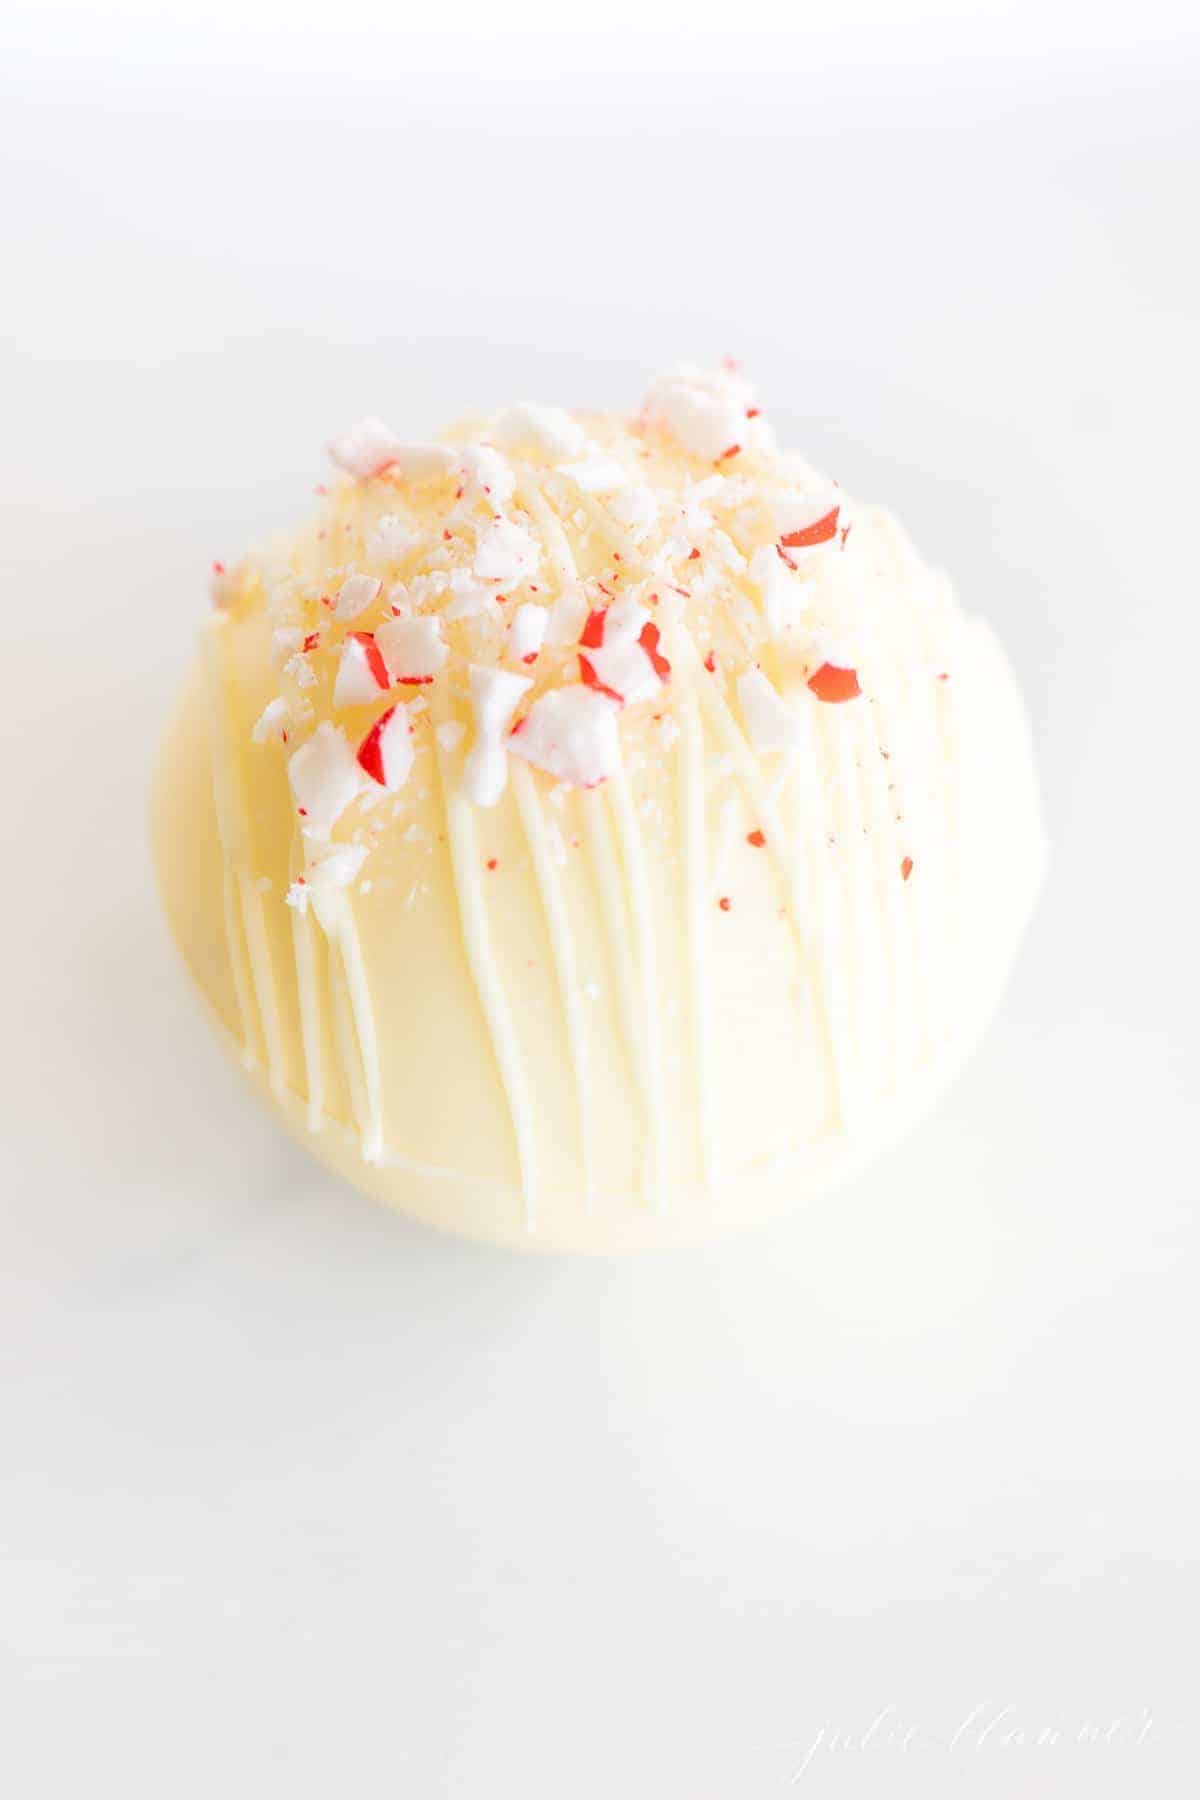 A white chocolate hot chocolate bomb covered in crushed peppermint on a marble surface.